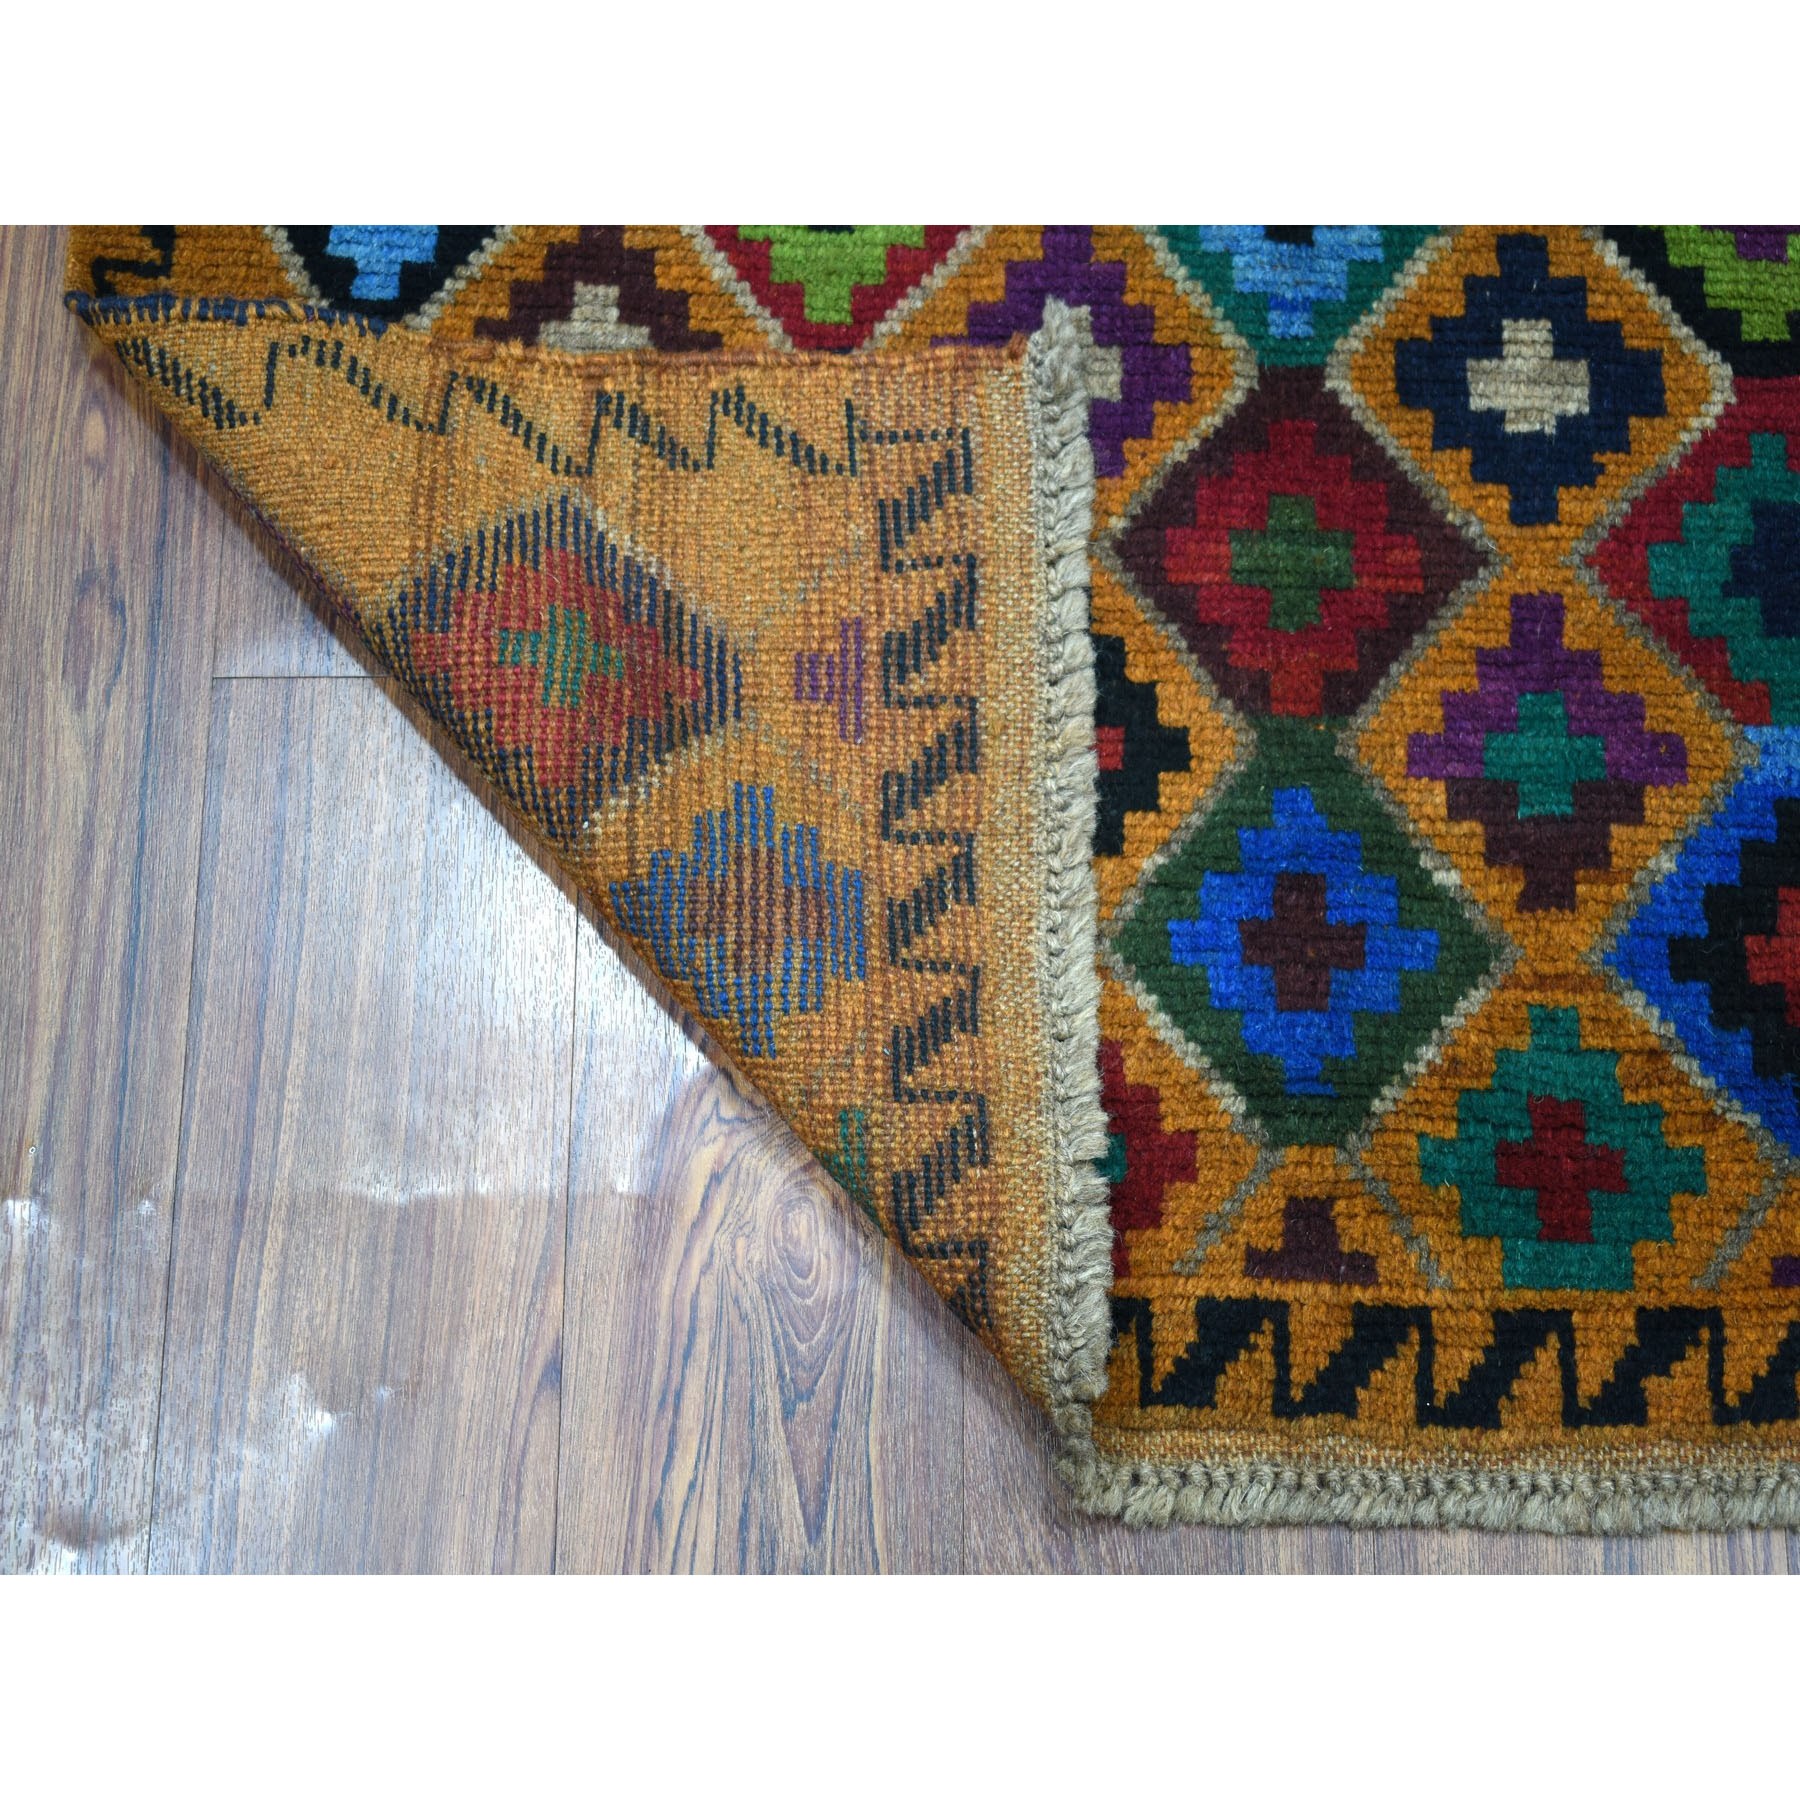 3'4"x4'8" Brown Tribal Design Colorful Afghan Baluch 100% Wool Hand Woven Oriental Rug 